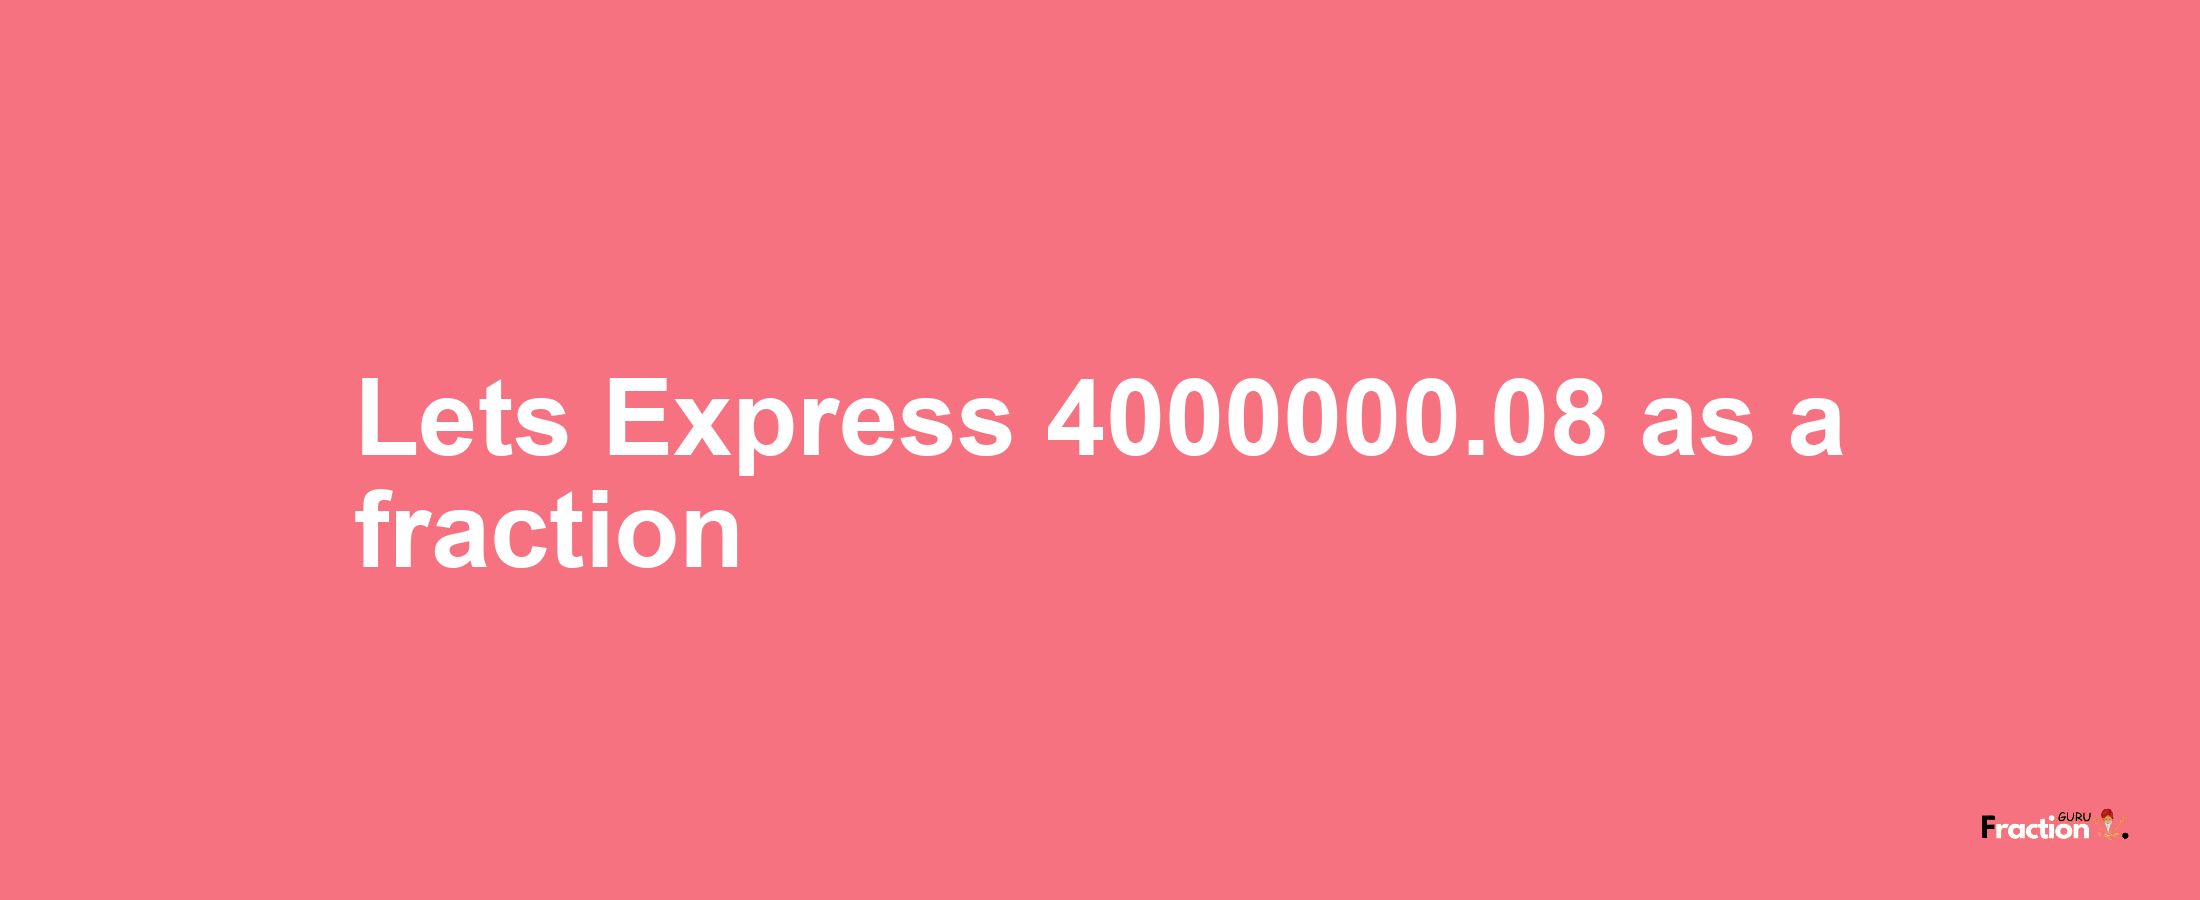 Lets Express 4000000.08 as afraction